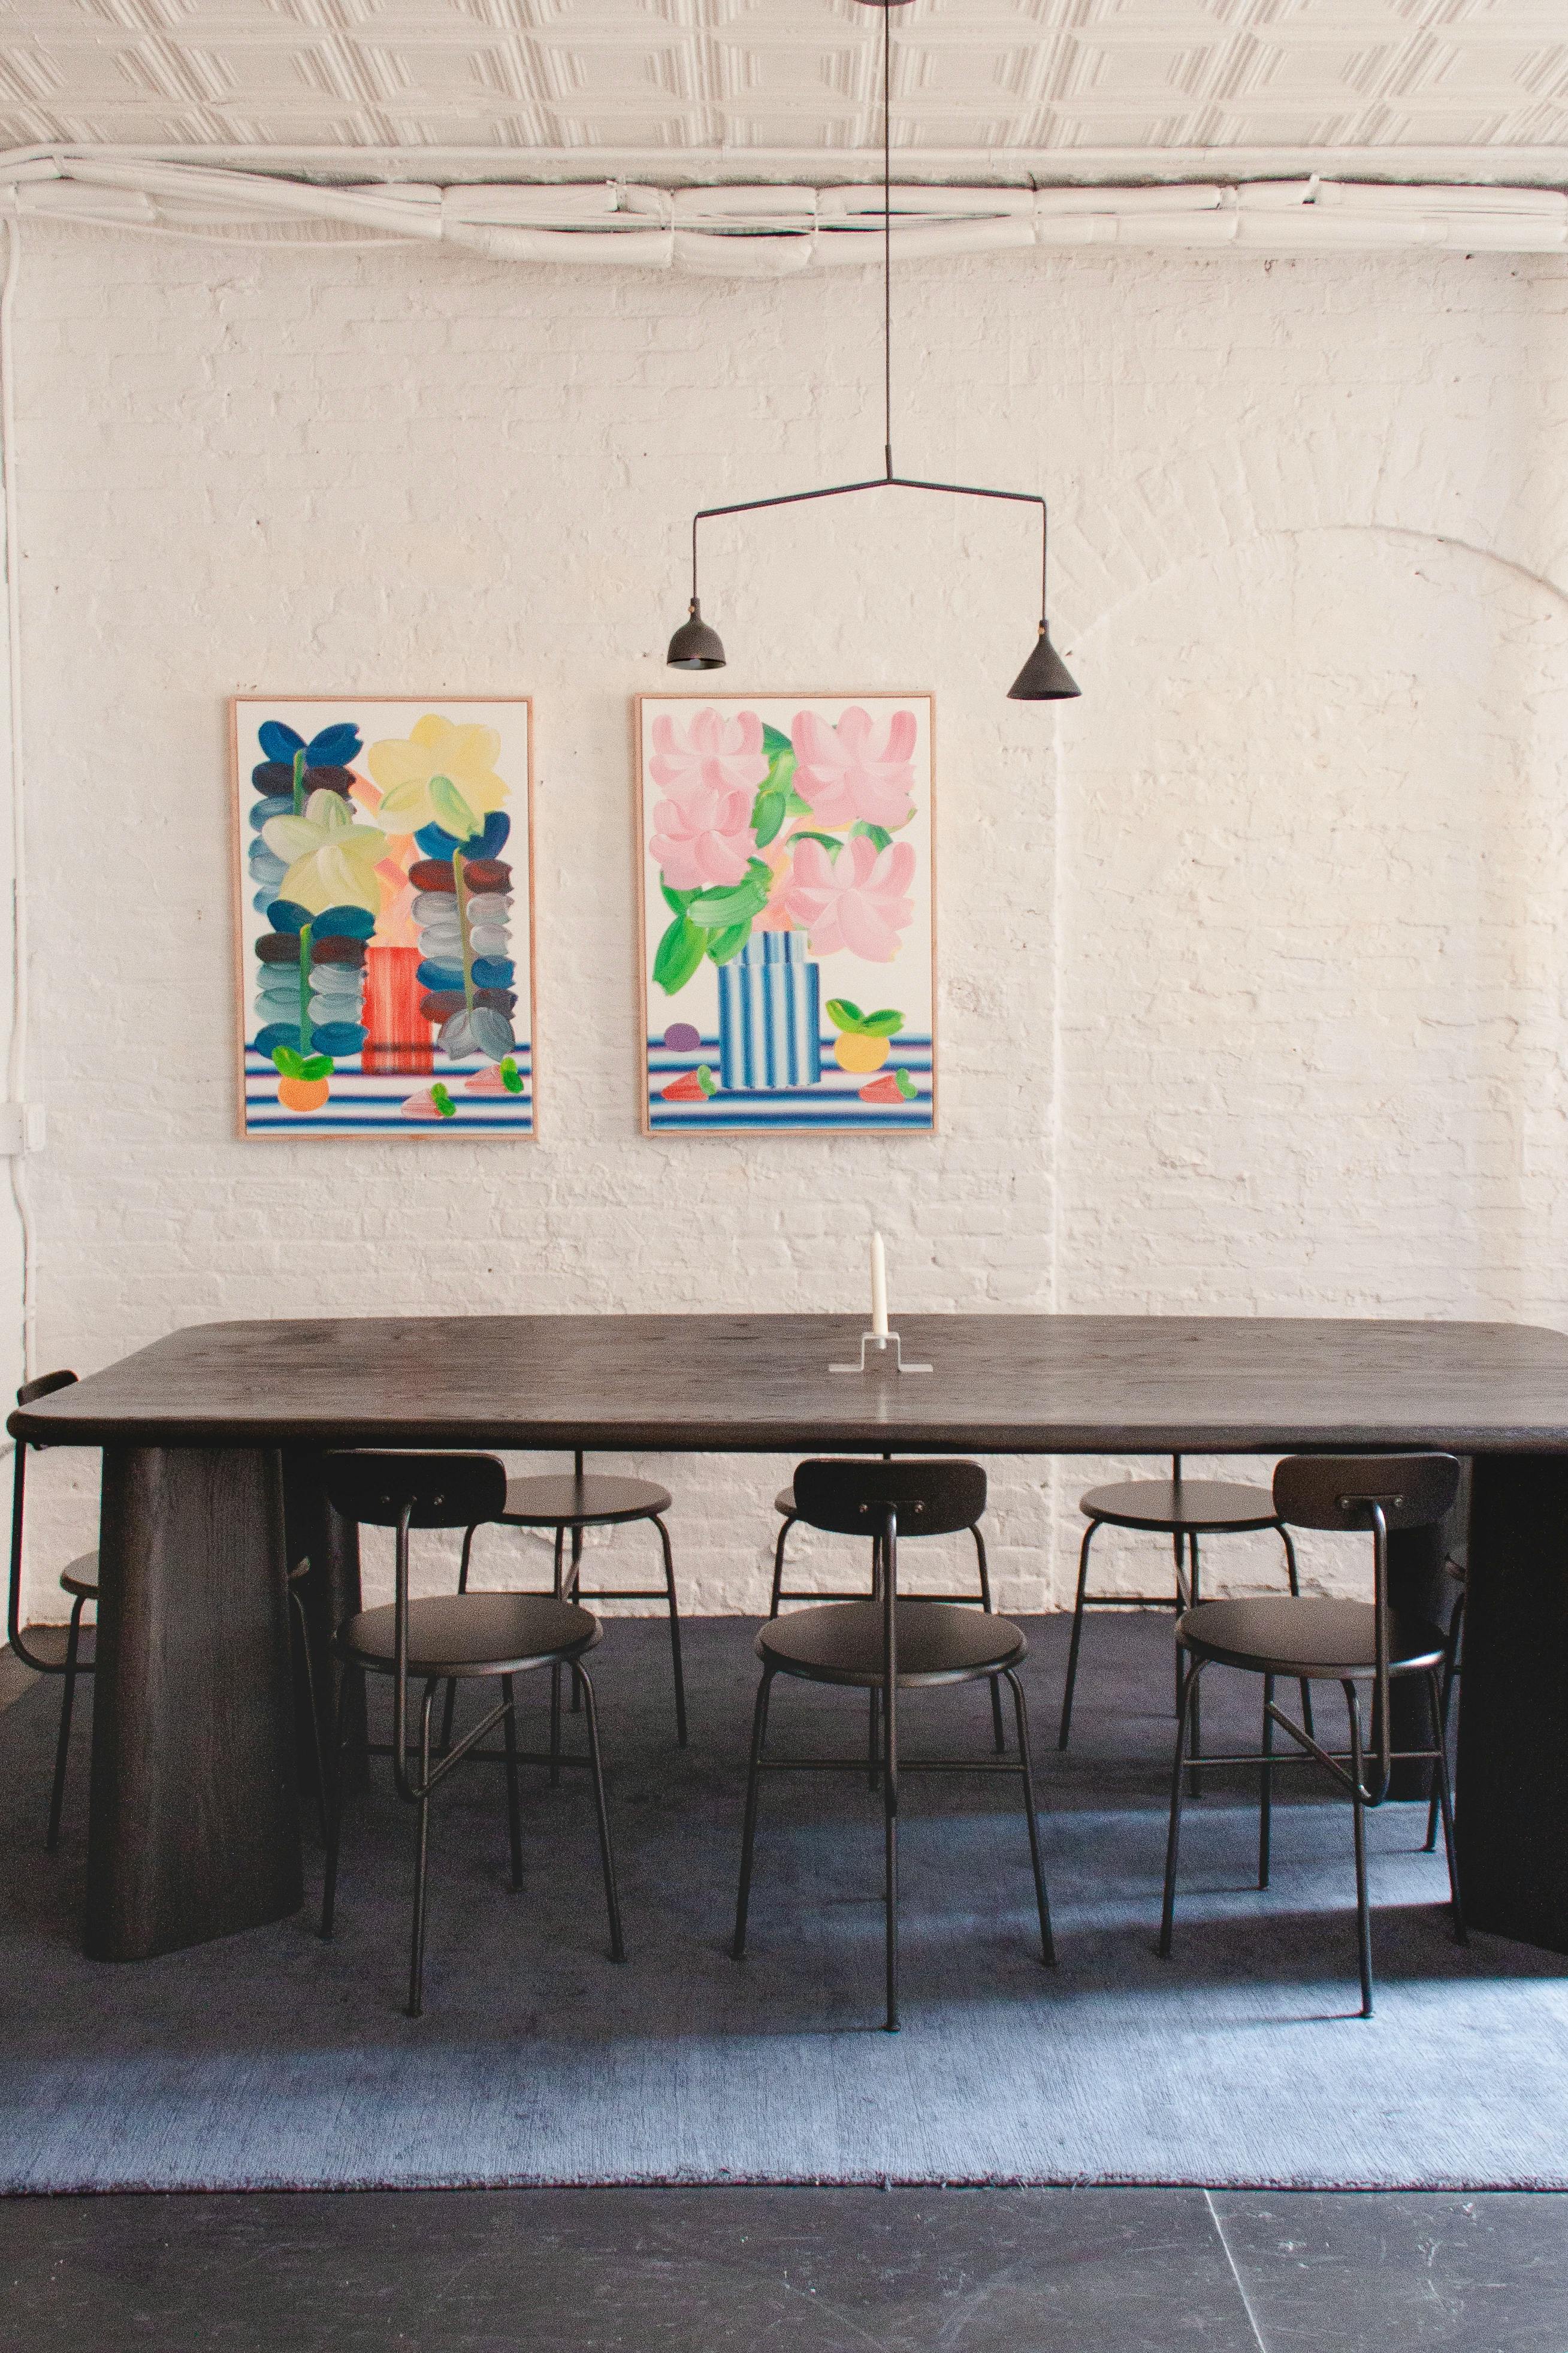 Two colorful still life paintings by artist Erin D. Garcia on a white brick wall above a black dining room table at Uprise Art.